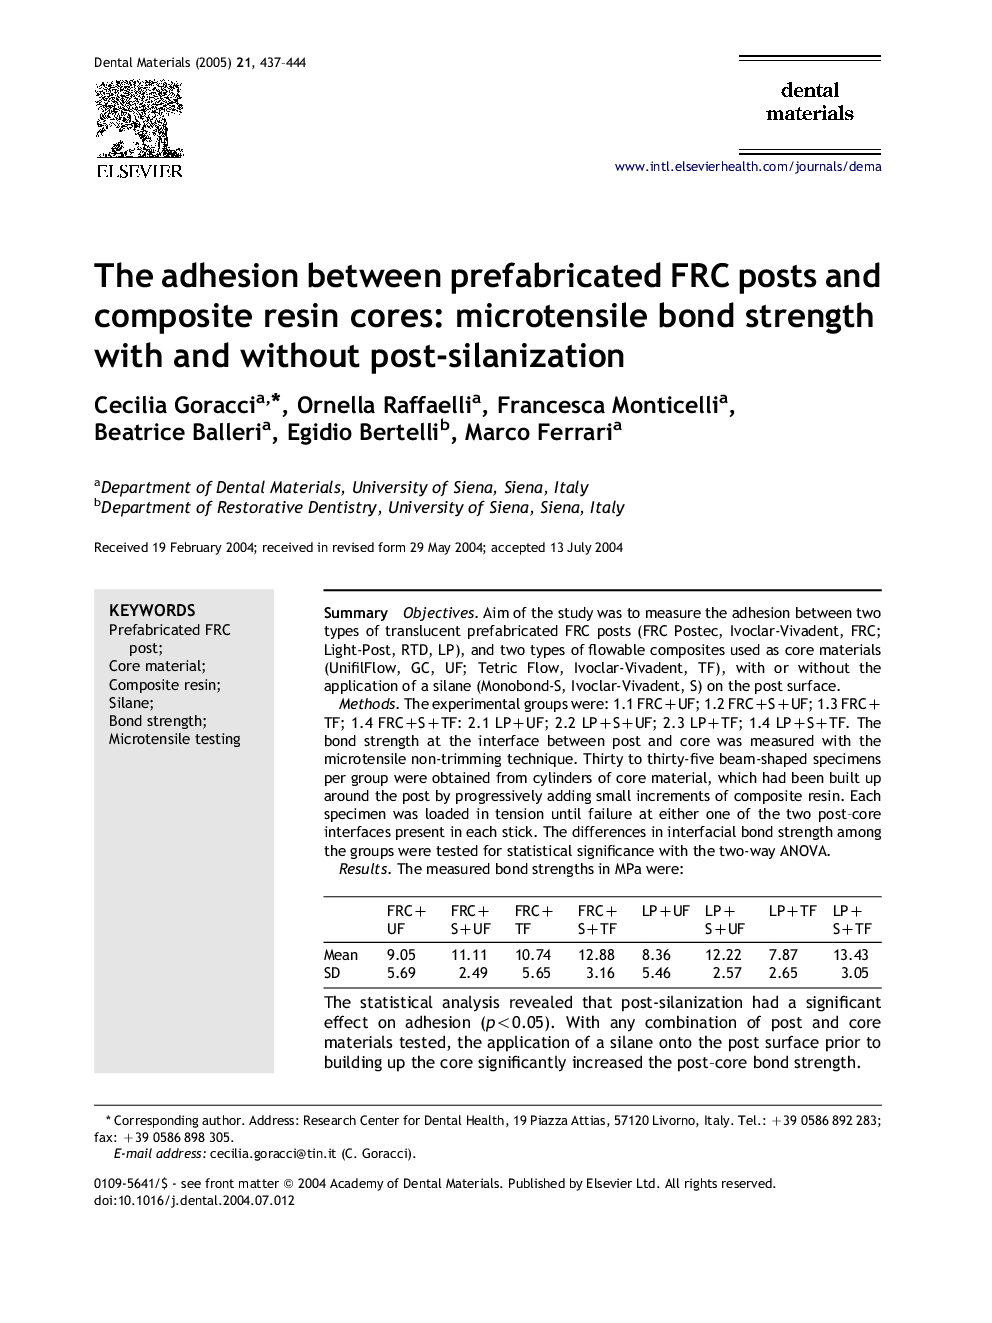 The adhesion between prefabricated FRC posts and composite resin cores: microtensile bond strength with and without post-silanization